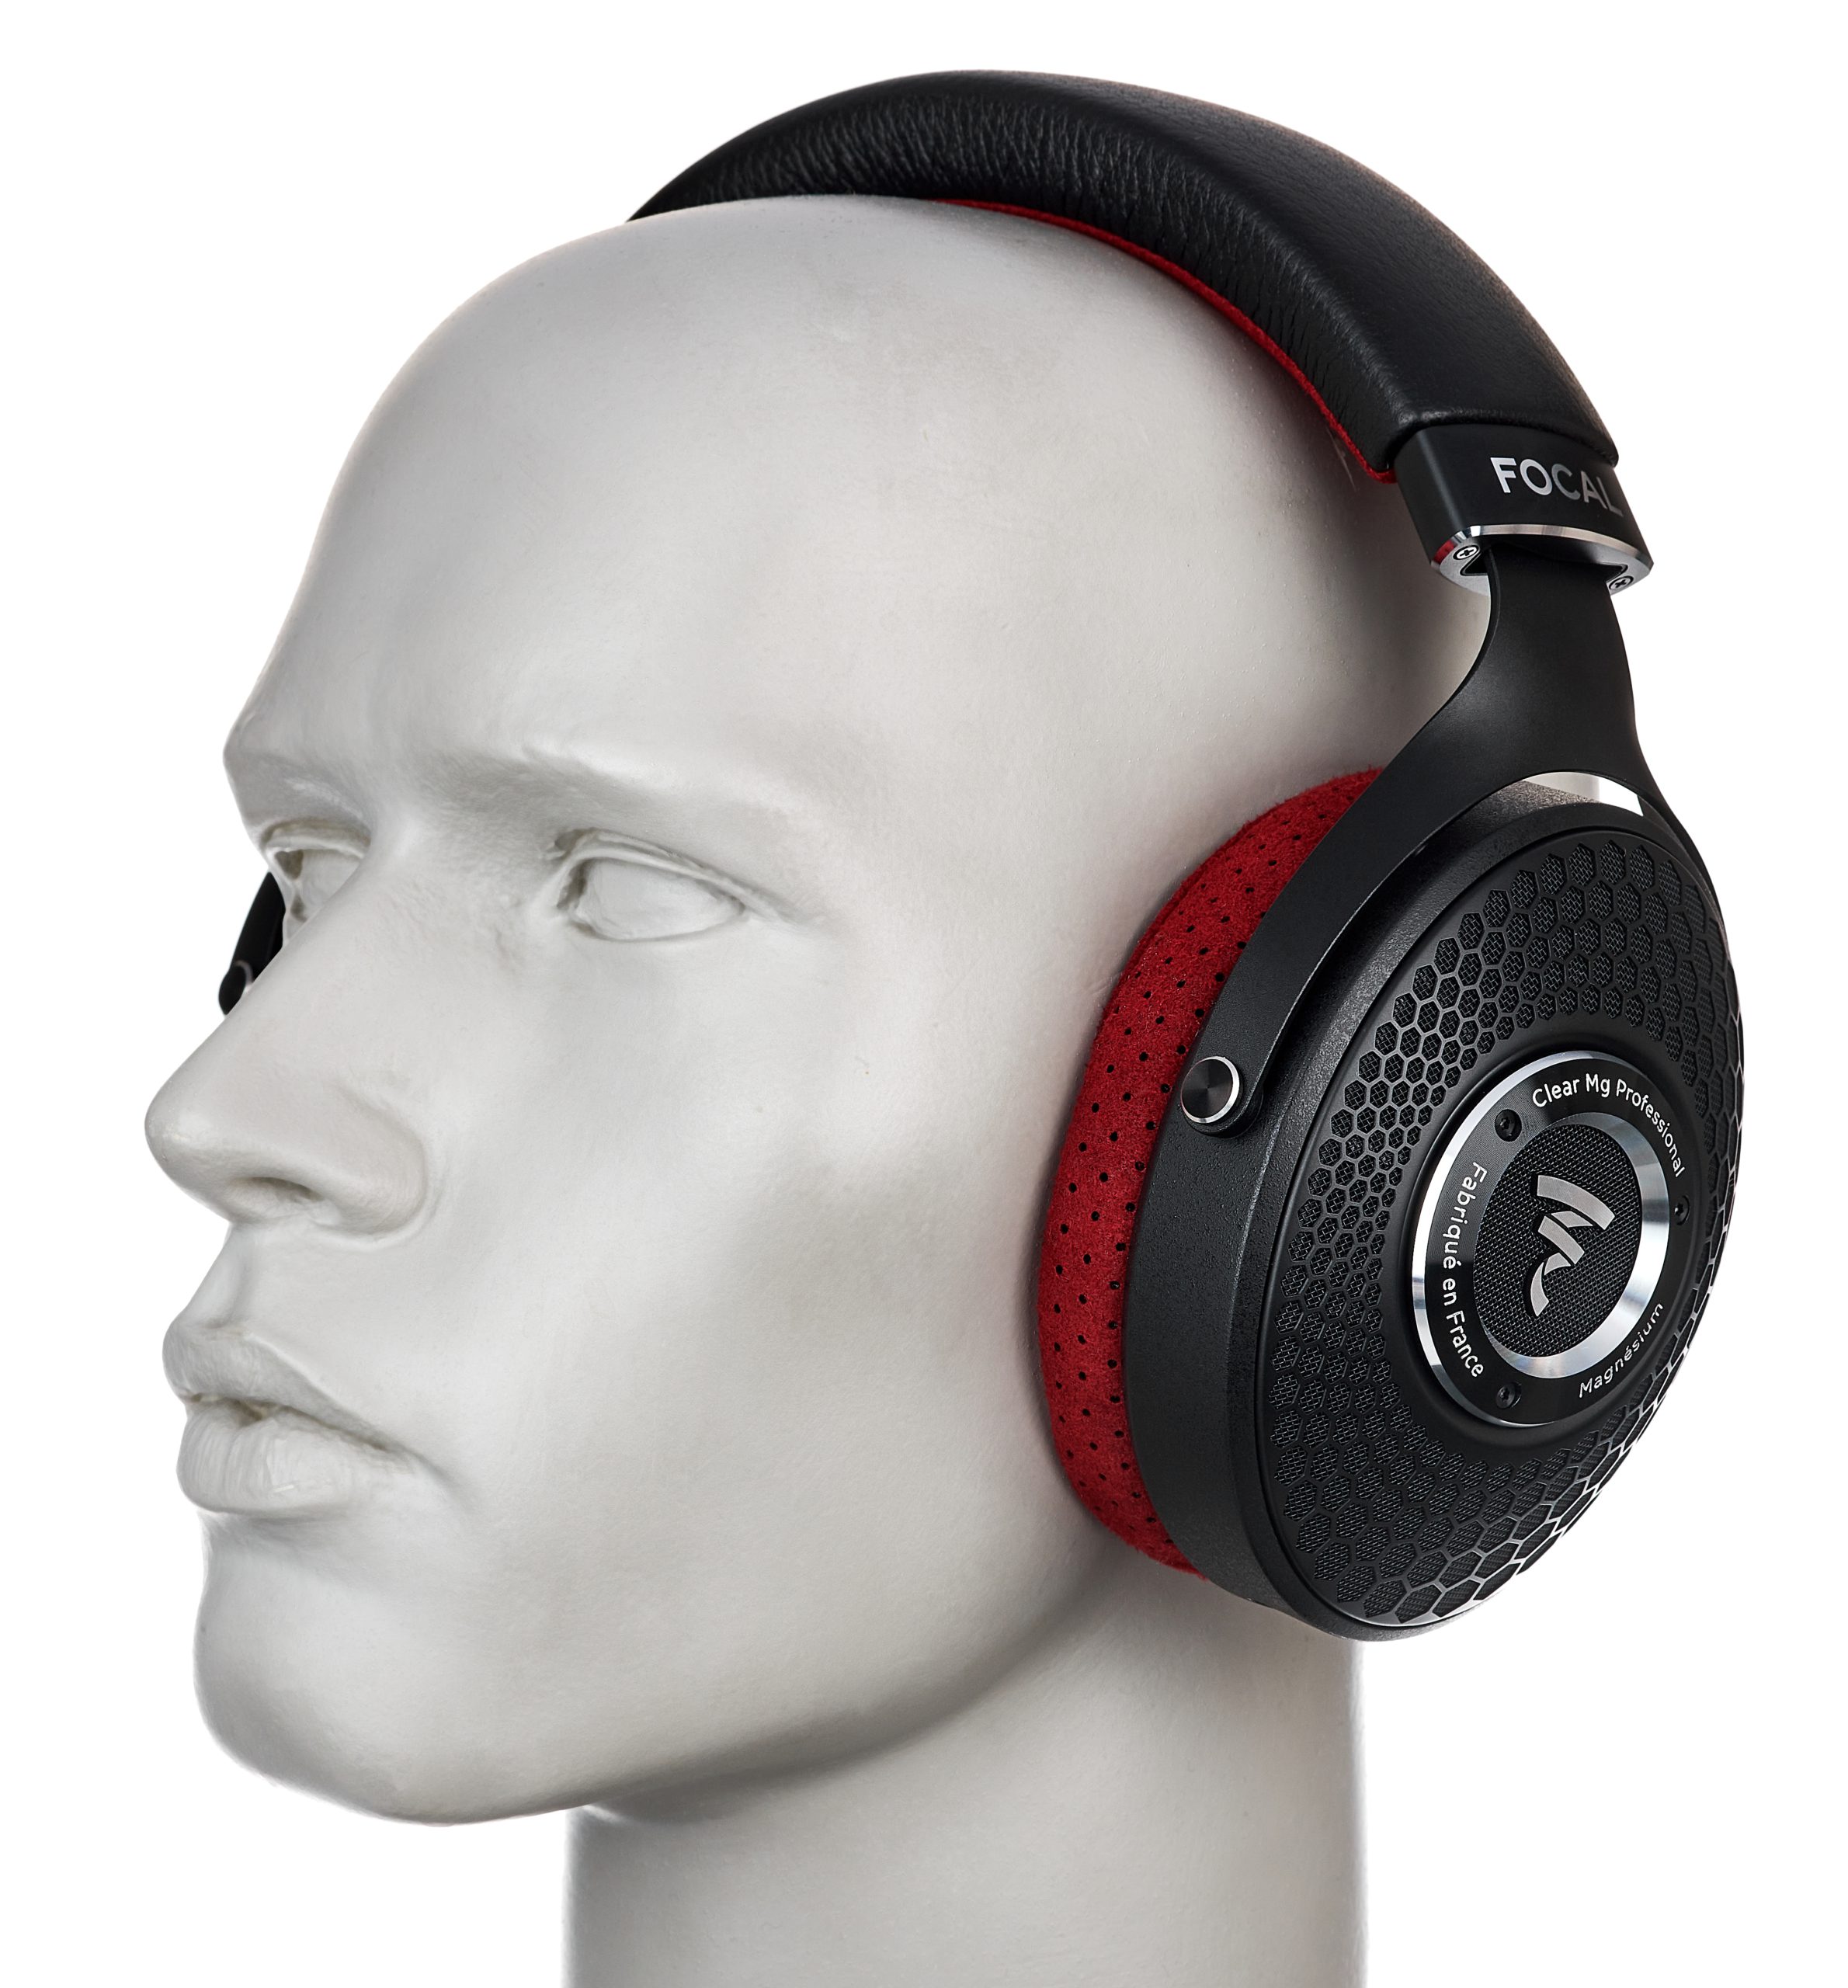 Focal Clear Mg Professional Review | headphonecheck.com